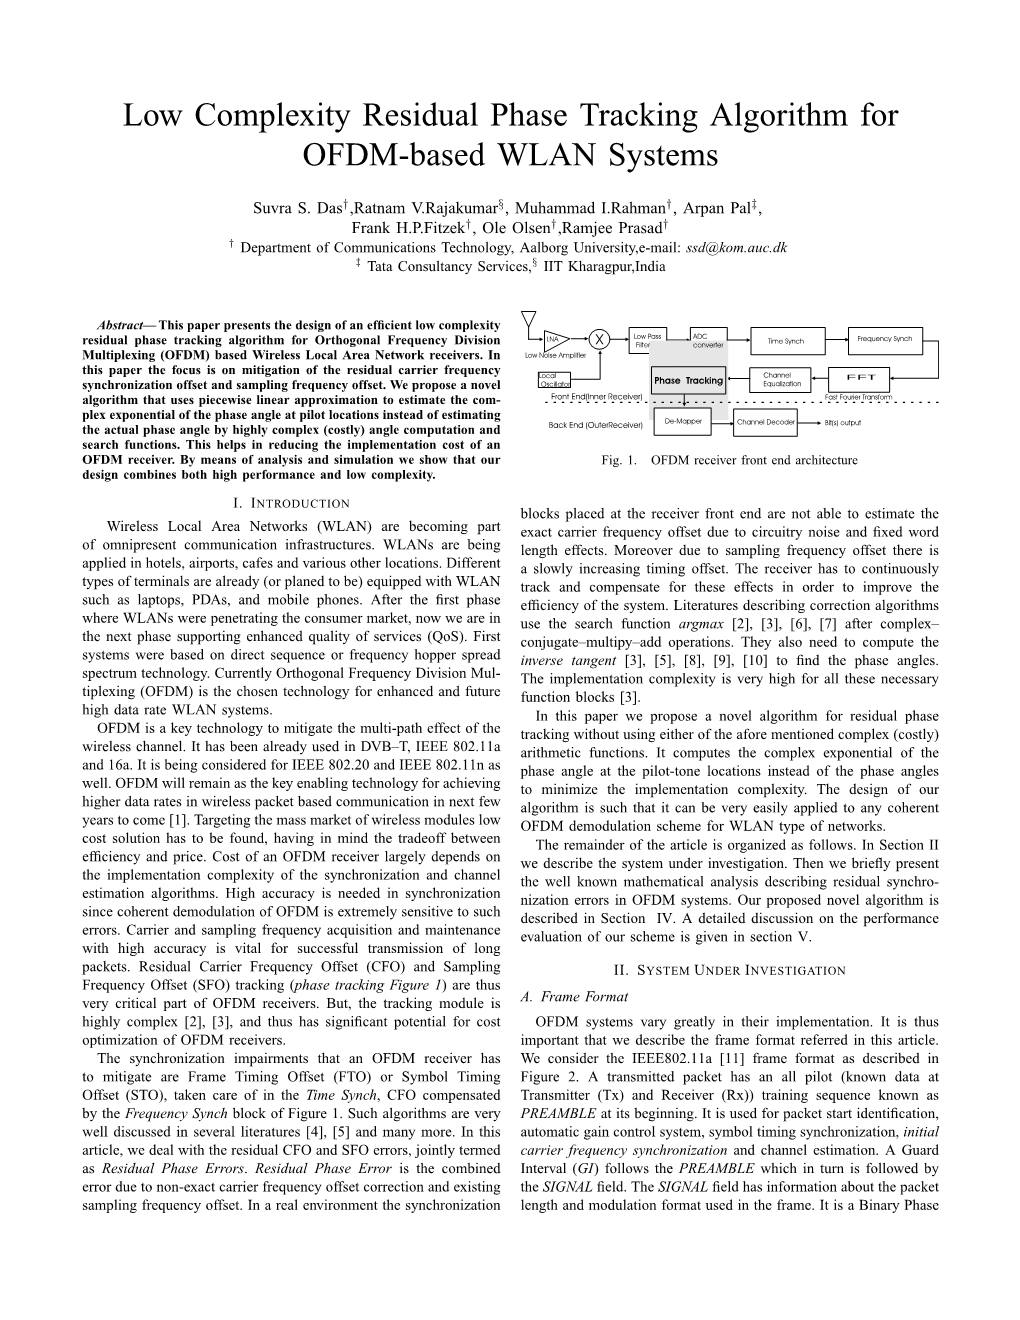 Low Complexity Residual Phase Tracking Algorithm for OFDM-Based WLAN Systems